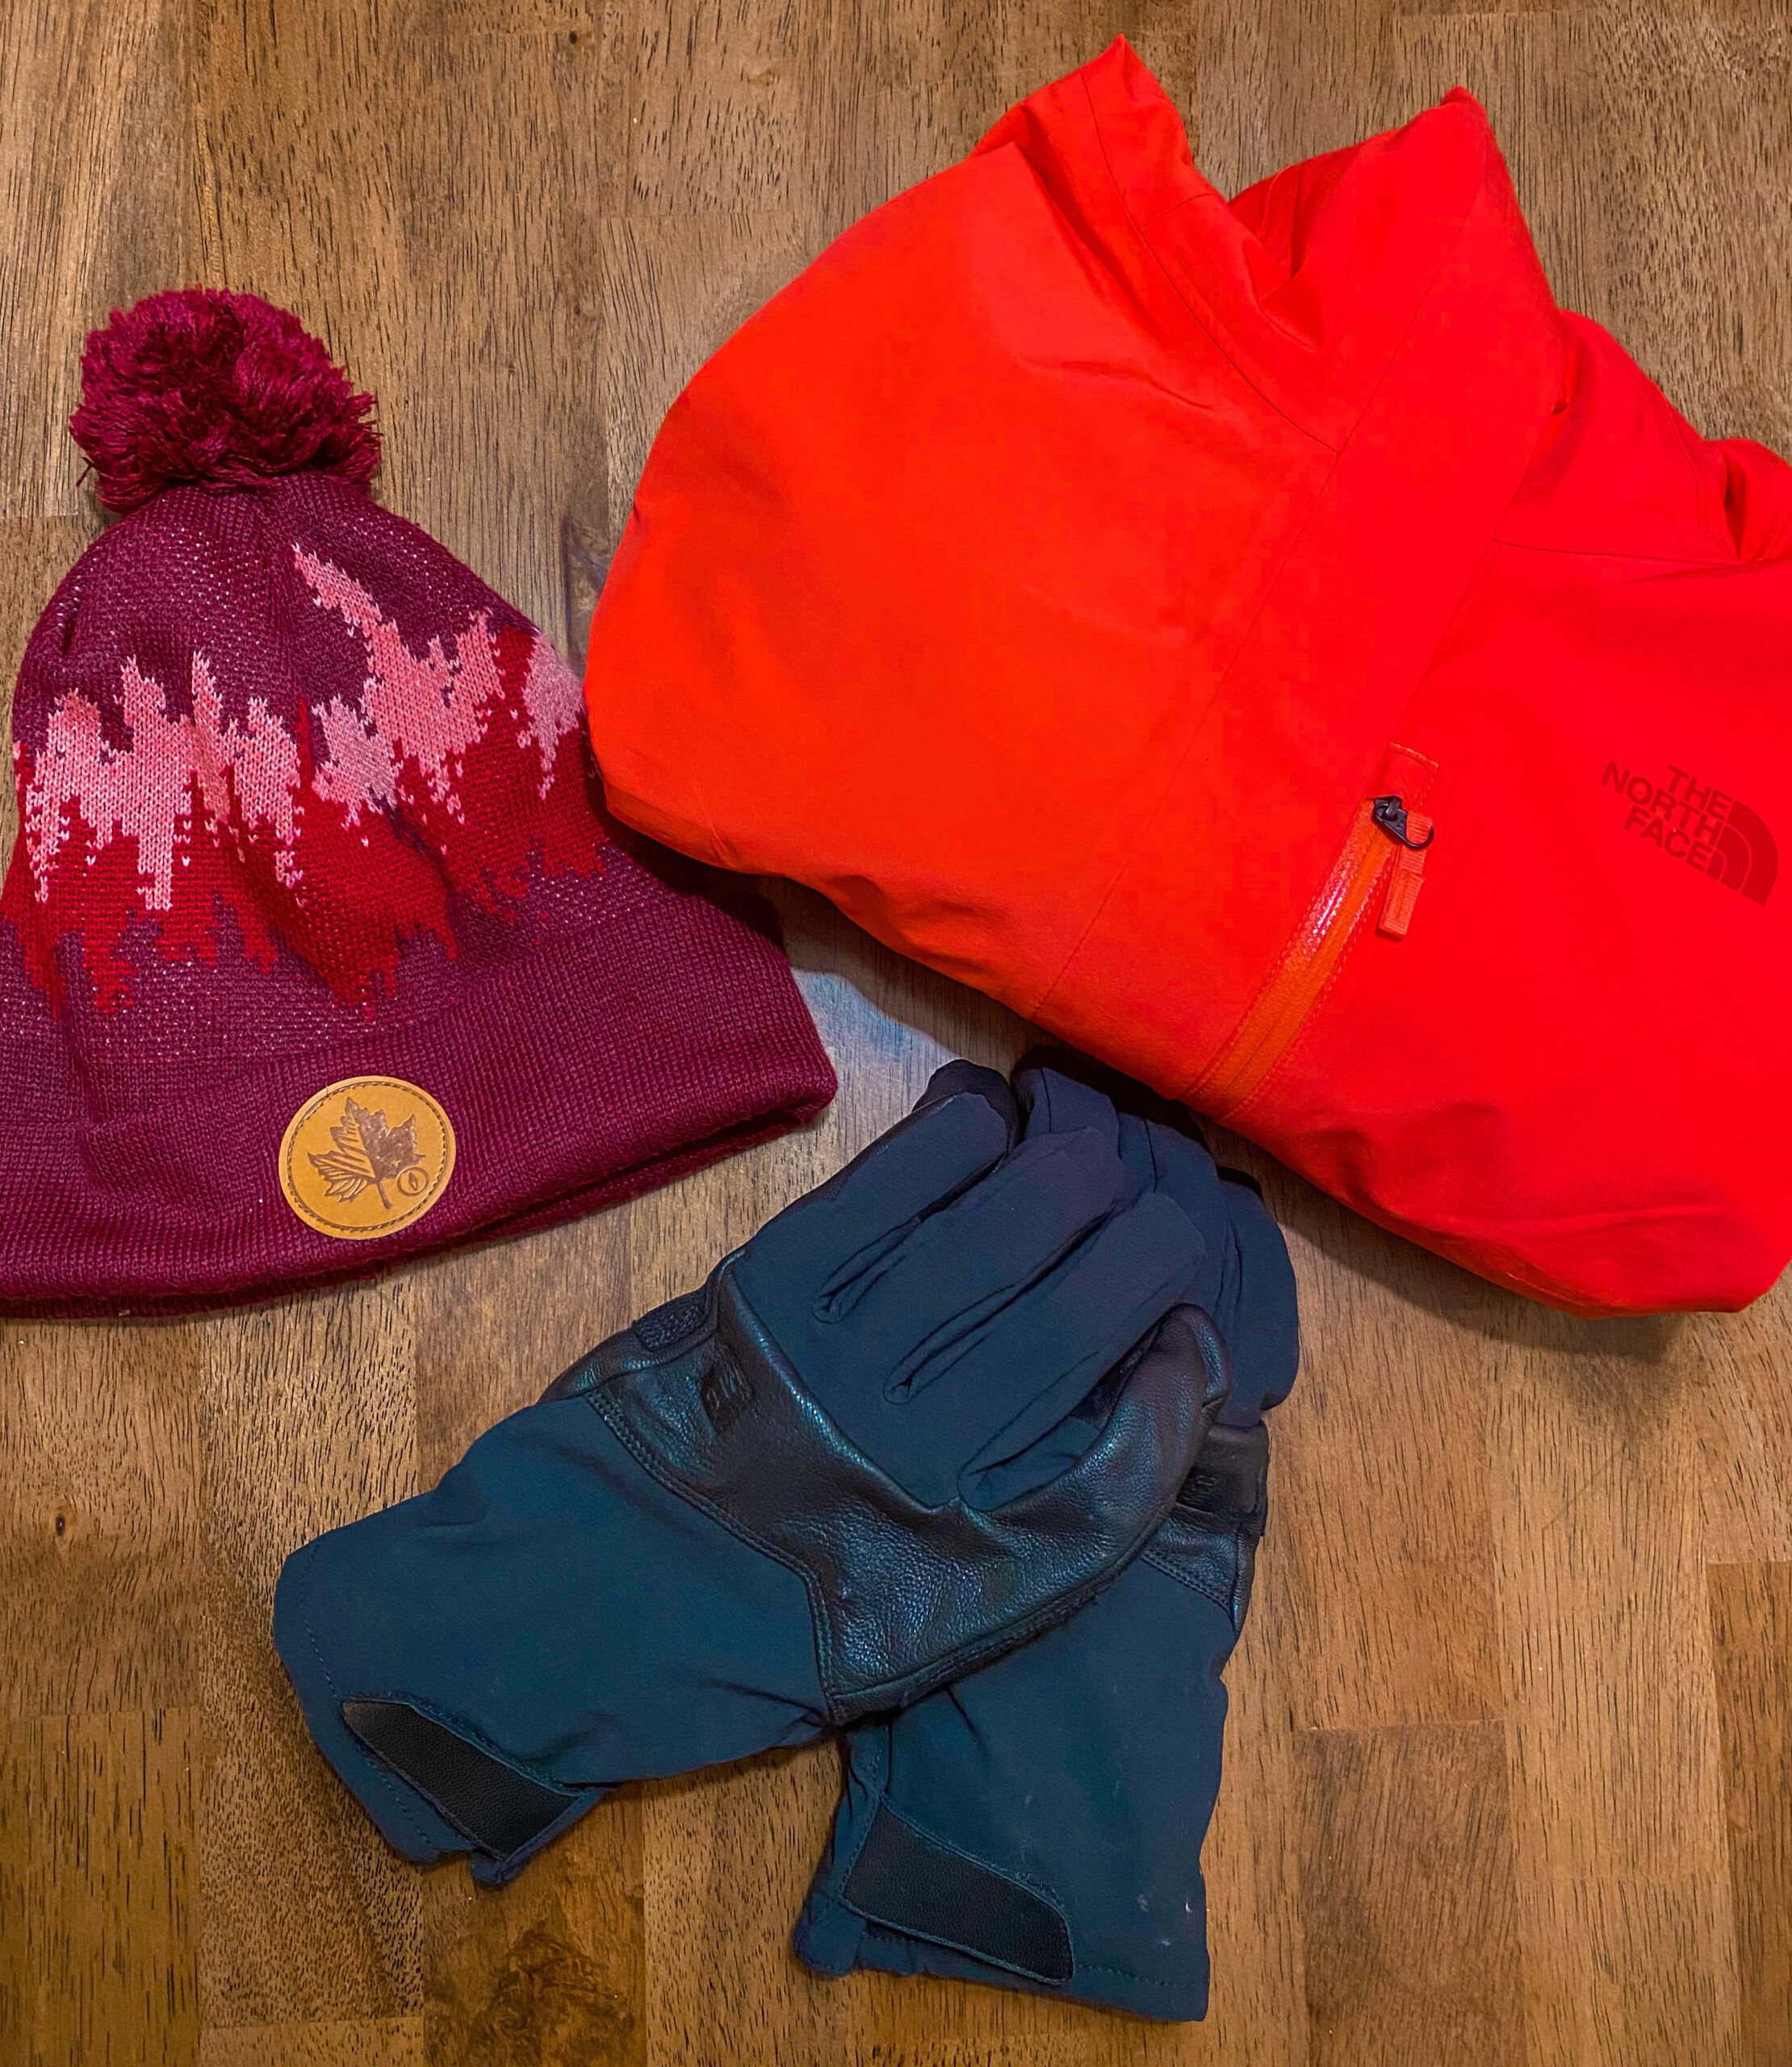 Hiking Clothes